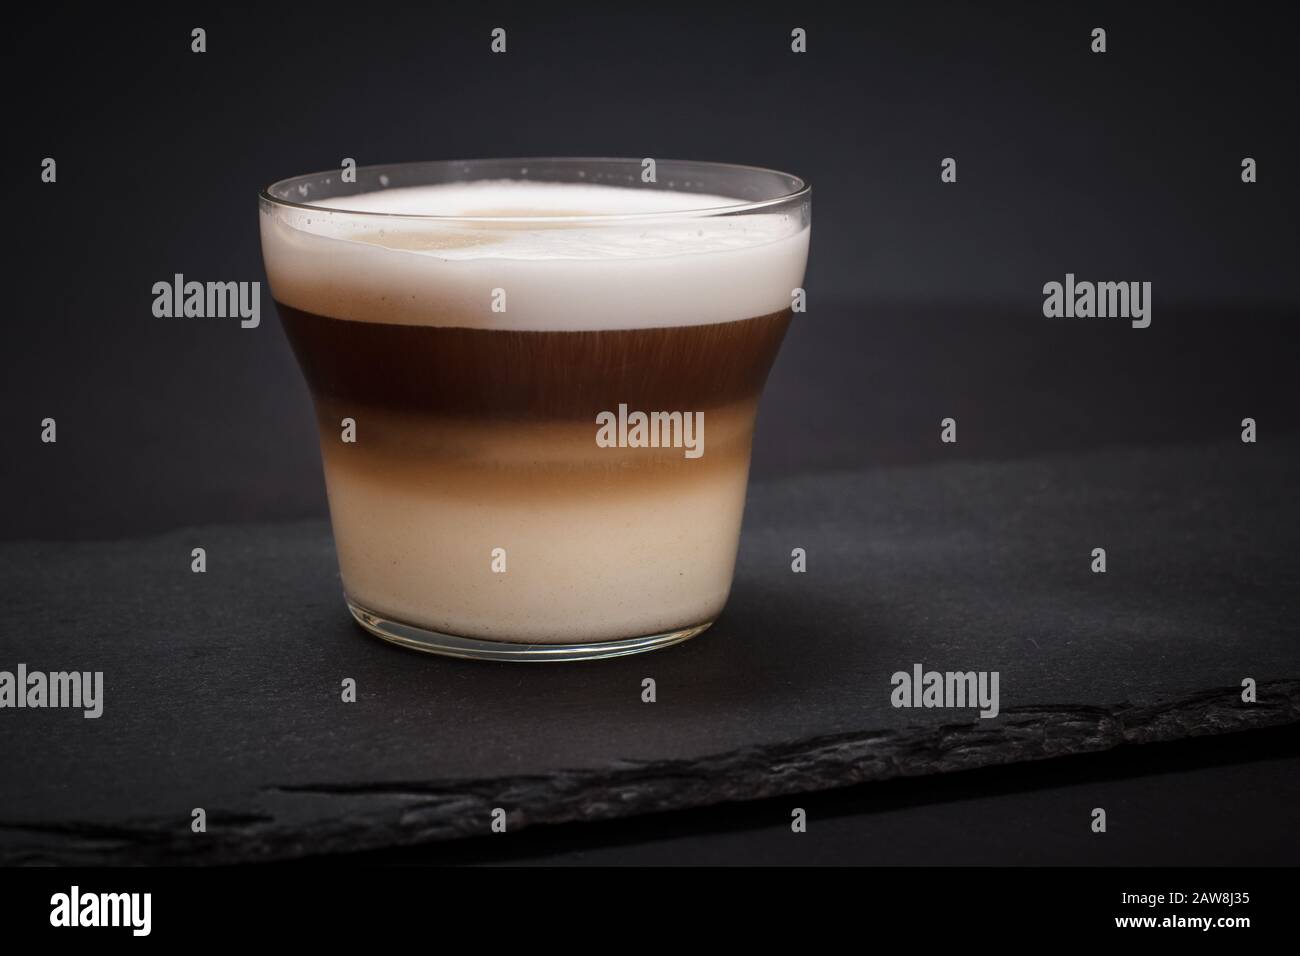 Cup of cappuccino on black stone board and dark background. Stock Photo